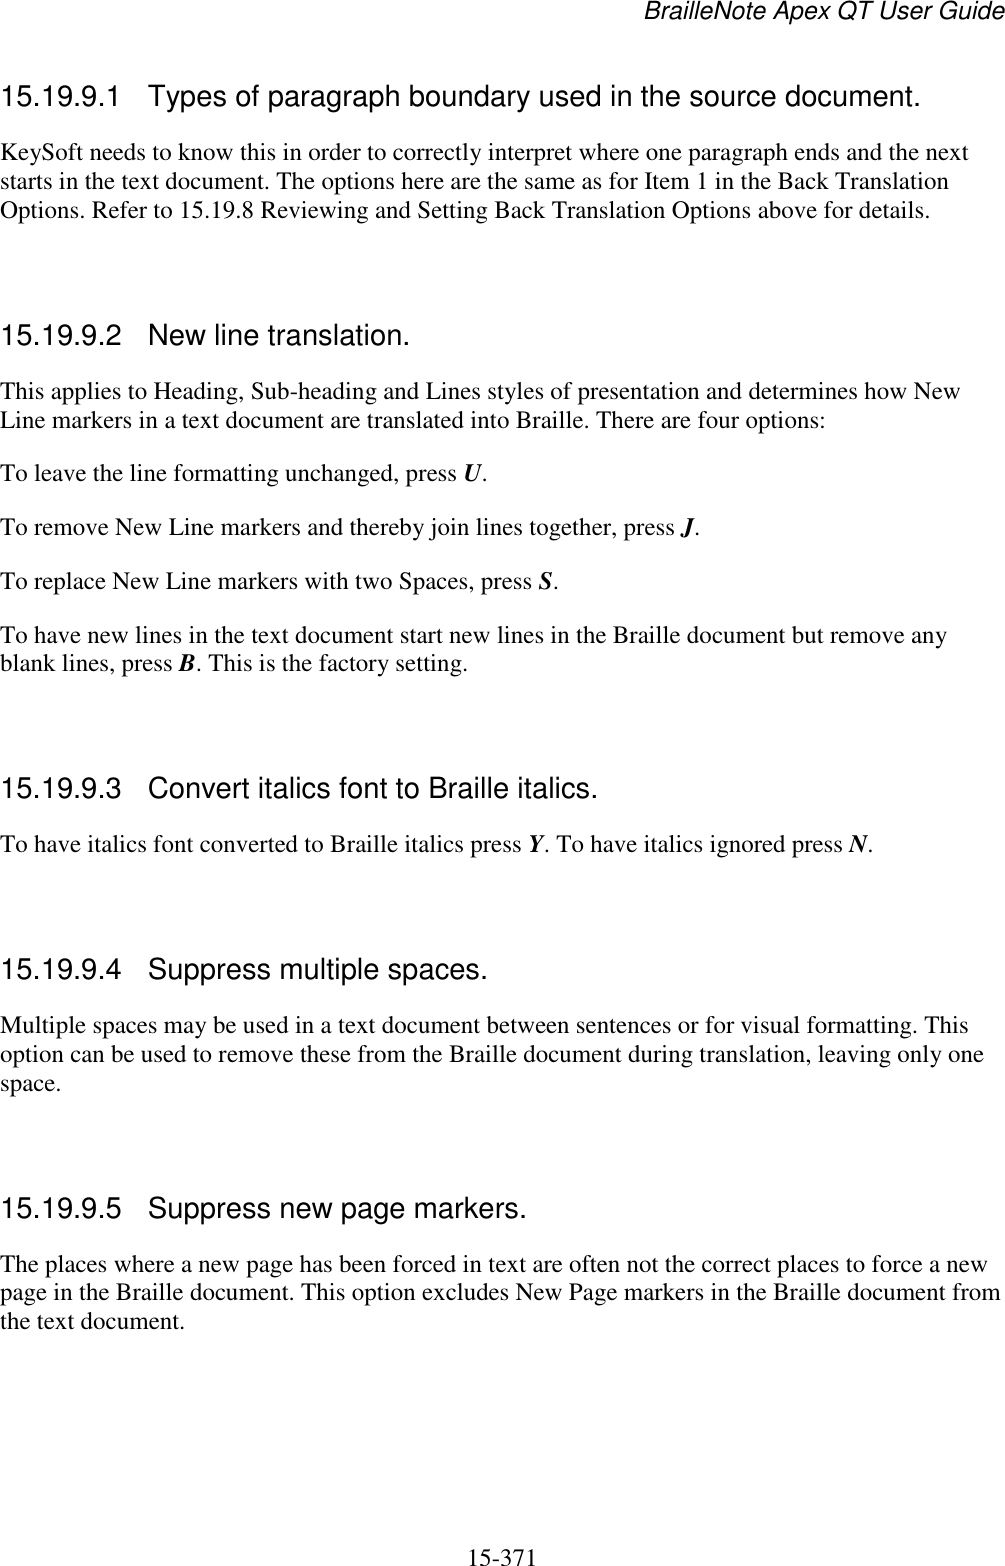 BrailleNote Apex QT User Guide  15-371   15.19.9.1  Types of paragraph boundary used in the source document. KeySoft needs to know this in order to correctly interpret where one paragraph ends and the next starts in the text document. The options here are the same as for Item 1 in the Back Translation Options. Refer to 15.19.8 Reviewing and Setting Back Translation Options above for details.   15.19.9.2  New line translation. This applies to Heading, Sub-heading and Lines styles of presentation and determines how New Line markers in a text document are translated into Braille. There are four options: To leave the line formatting unchanged, press U. To remove New Line markers and thereby join lines together, press J. To replace New Line markers with two Spaces, press S. To have new lines in the text document start new lines in the Braille document but remove any blank lines, press B. This is the factory setting.   15.19.9.3  Convert italics font to Braille italics. To have italics font converted to Braille italics press Y. To have italics ignored press N.   15.19.9.4  Suppress multiple spaces. Multiple spaces may be used in a text document between sentences or for visual formatting. This option can be used to remove these from the Braille document during translation, leaving only one space.   15.19.9.5  Suppress new page markers. The places where a new page has been forced in text are often not the correct places to force a new page in the Braille document. This option excludes New Page markers in the Braille document from the text document.   